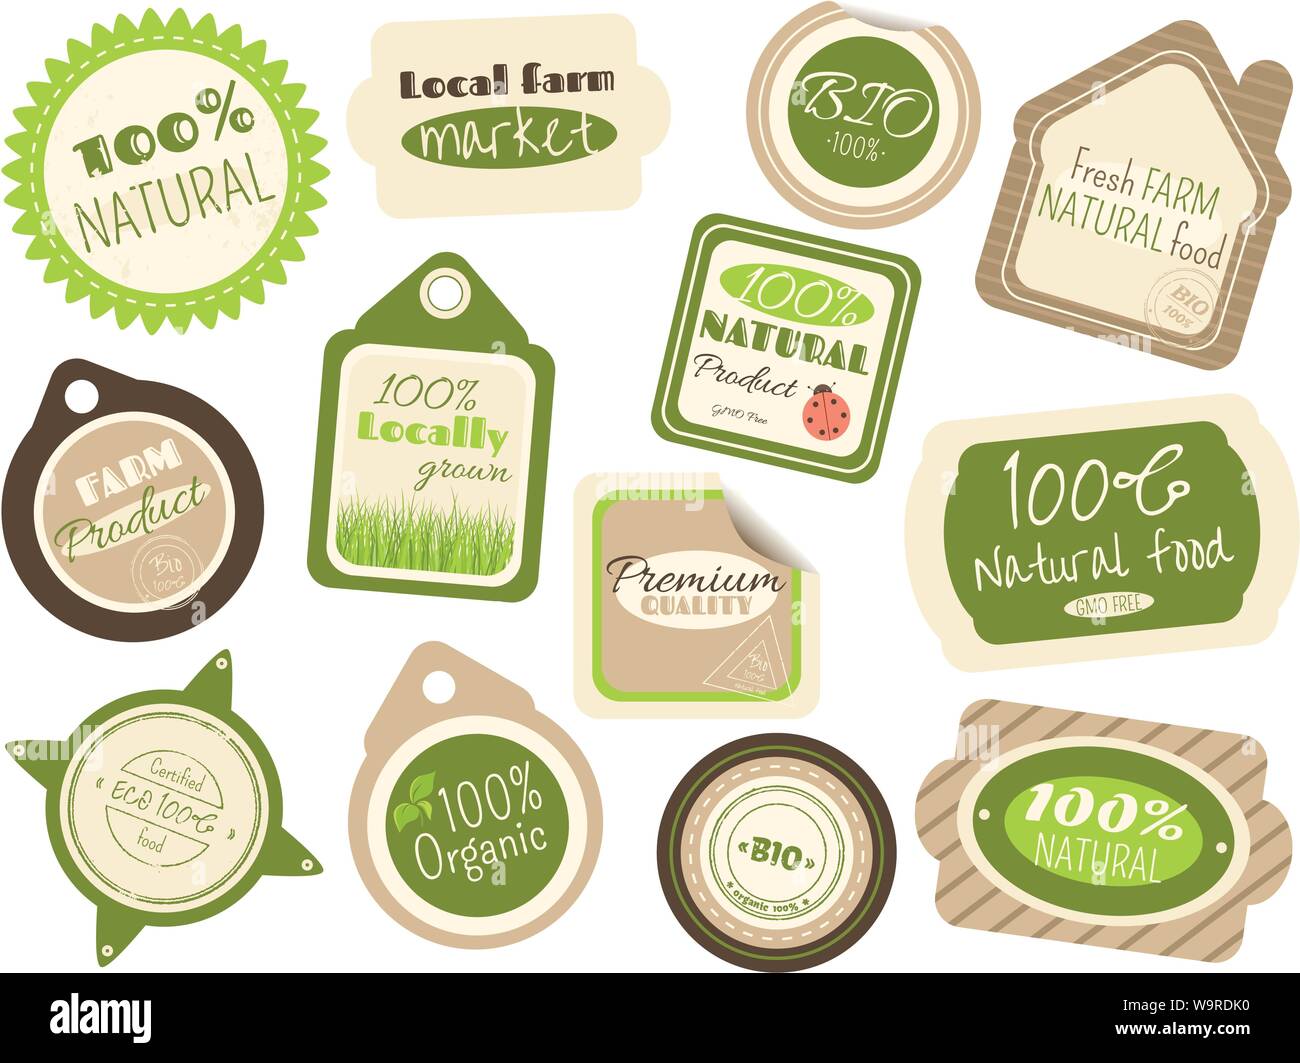 Set of labels and stickers in retro style with letterings for farm food shops. Eco and bio concept. Inscriptions 100% natural, premium quality, certif Stock Vector